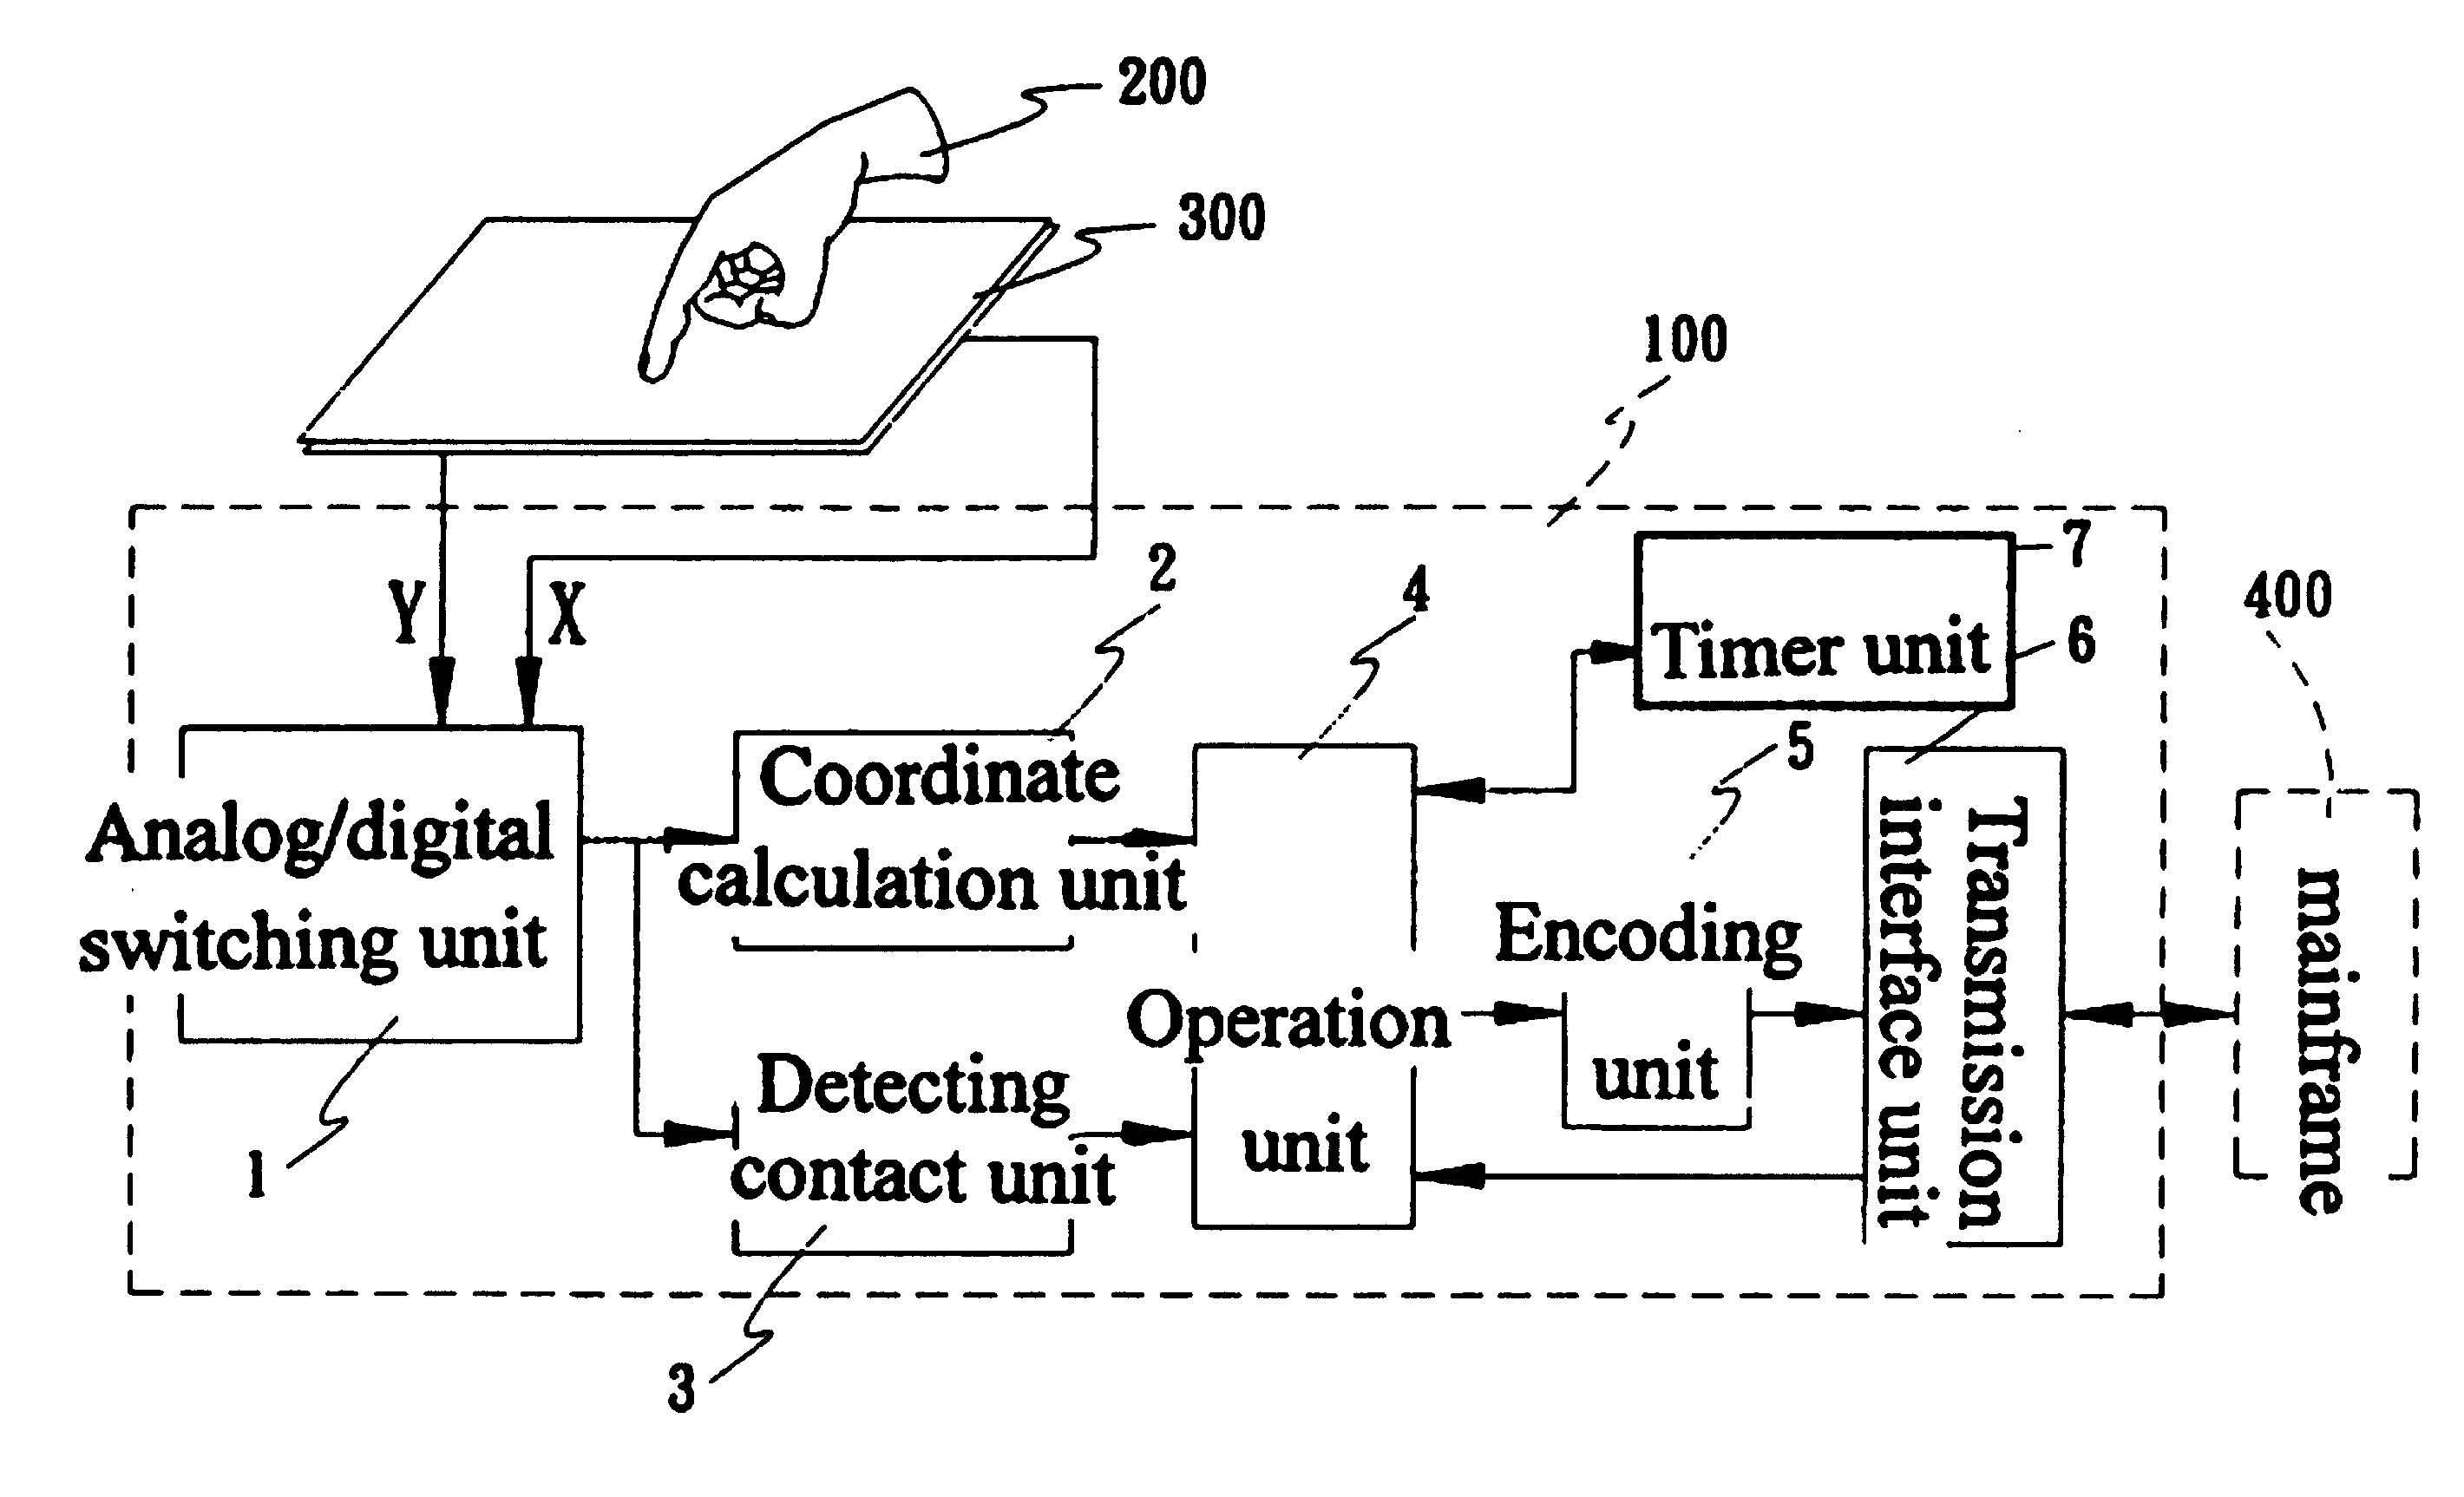 Method for identifying a movement of single tap on a touch device